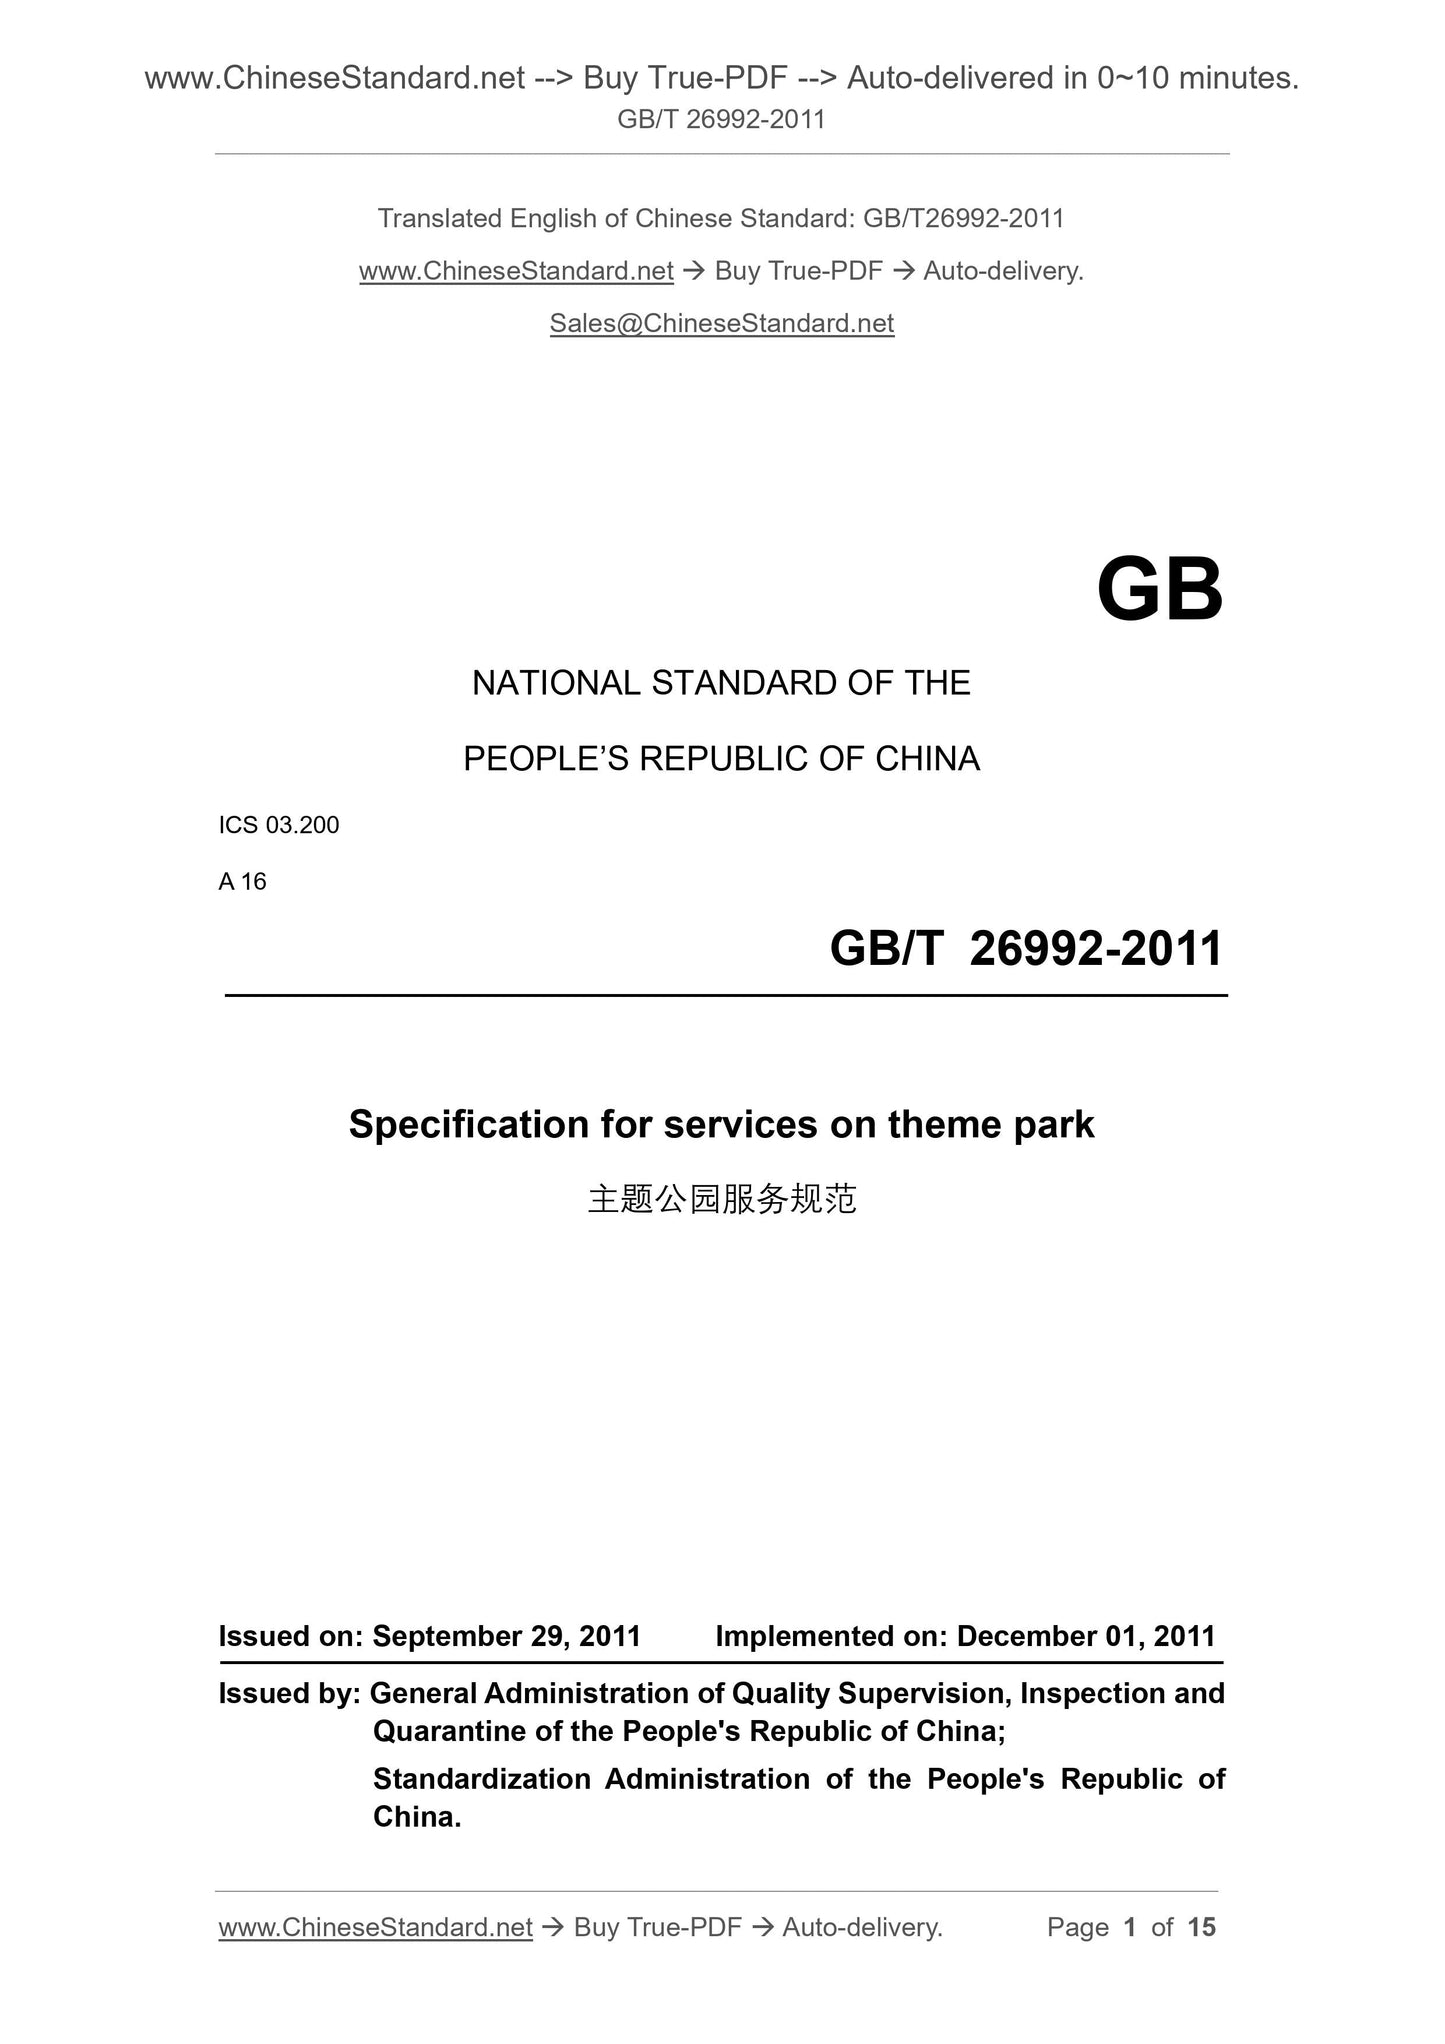 GB/T 26992-2011 Page 1